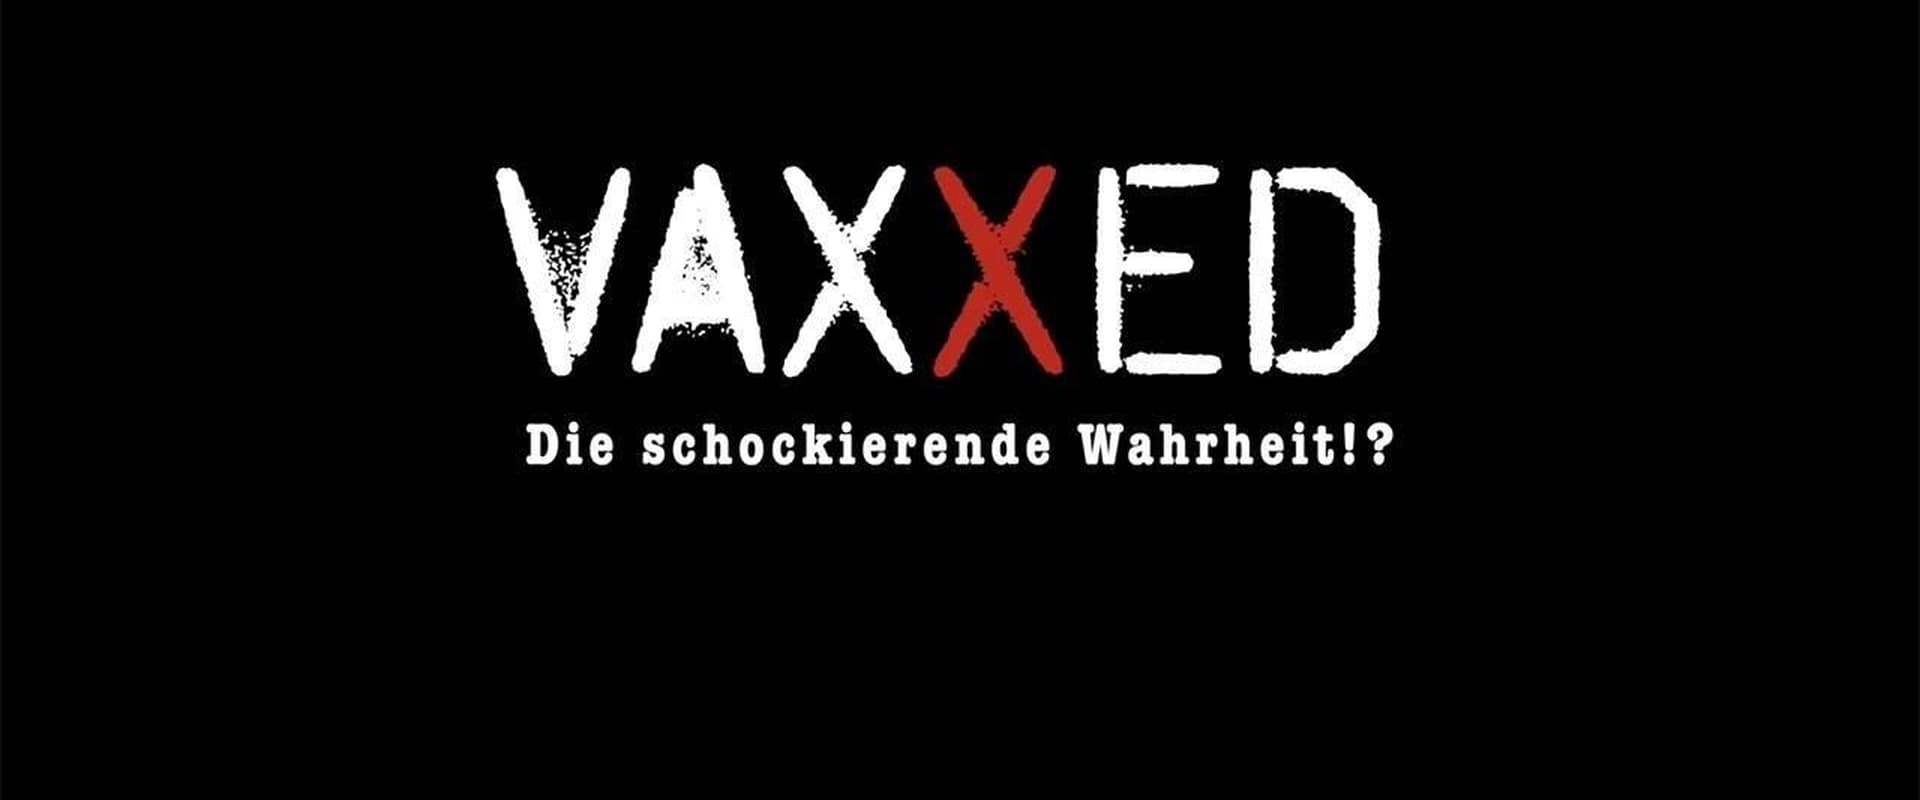 Vaxxed: From Cover-Up to Catastrophe